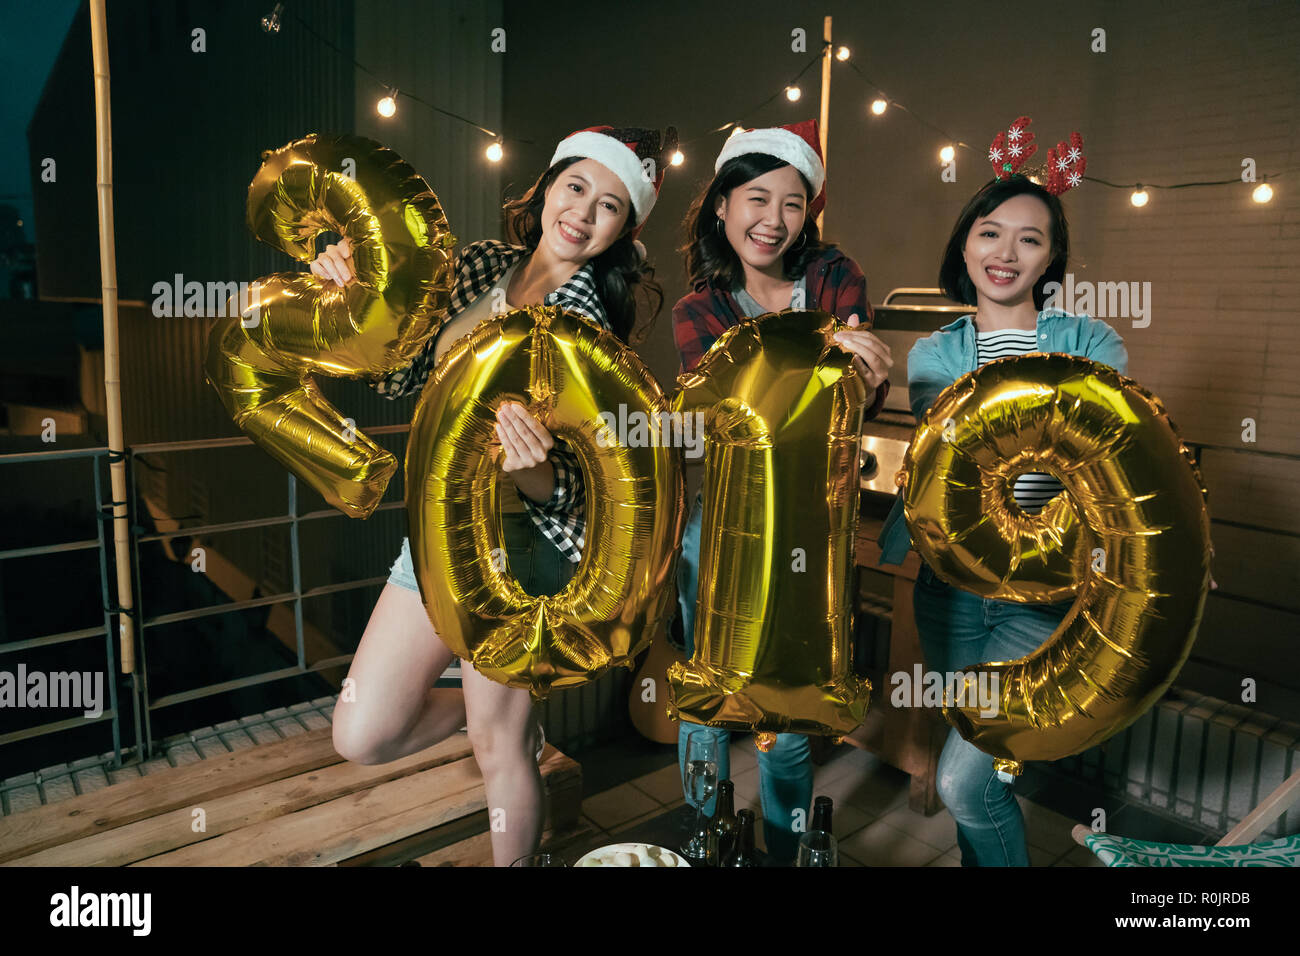 cheerful ladies enjoy music on balcony celebrating holding gold 2019 balloons on new year eve party. young girls with christmas costume outdoor at nig Stock Photo